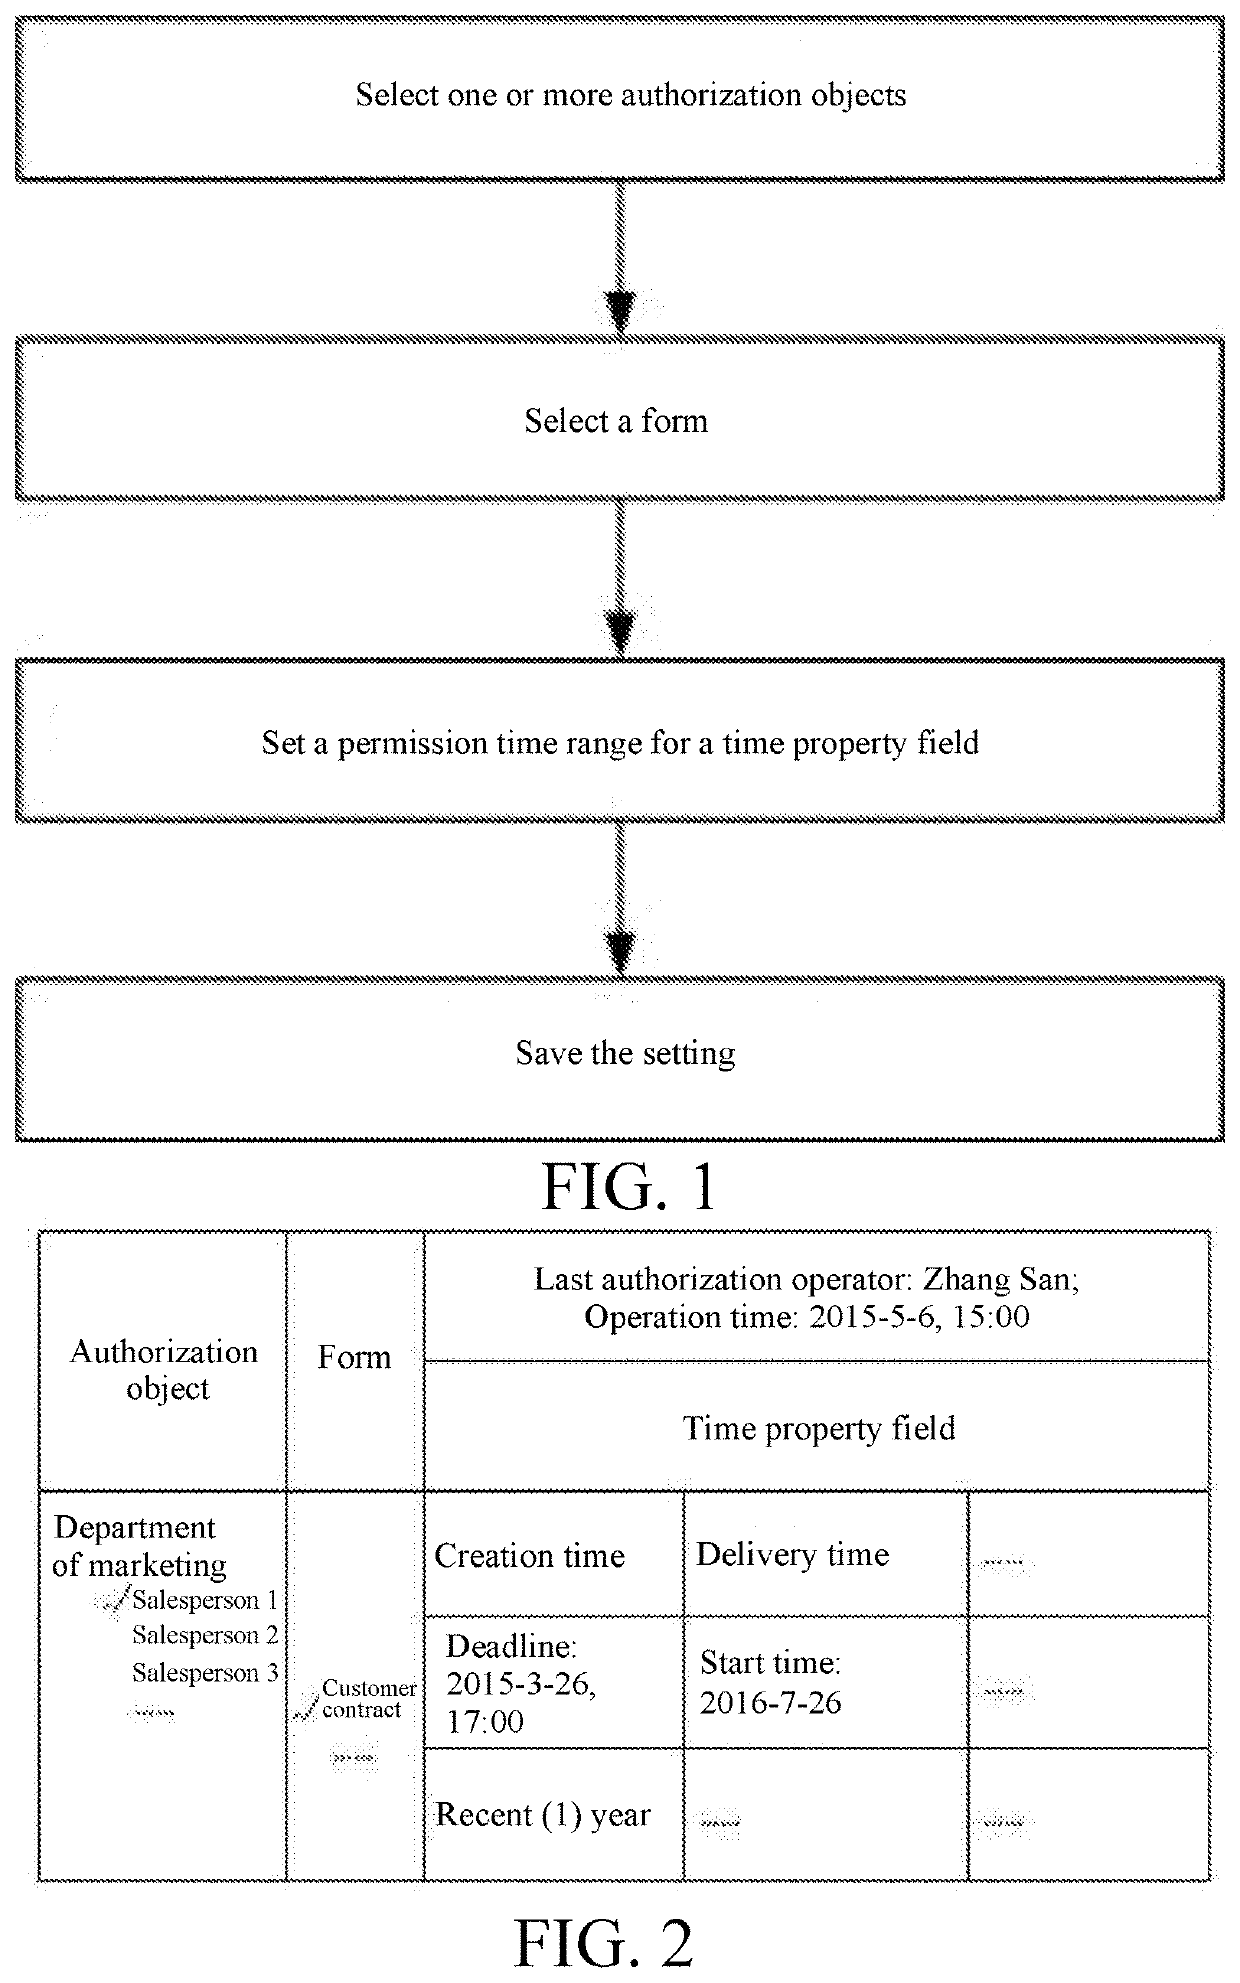 Form authority granting method based on time property fields of form